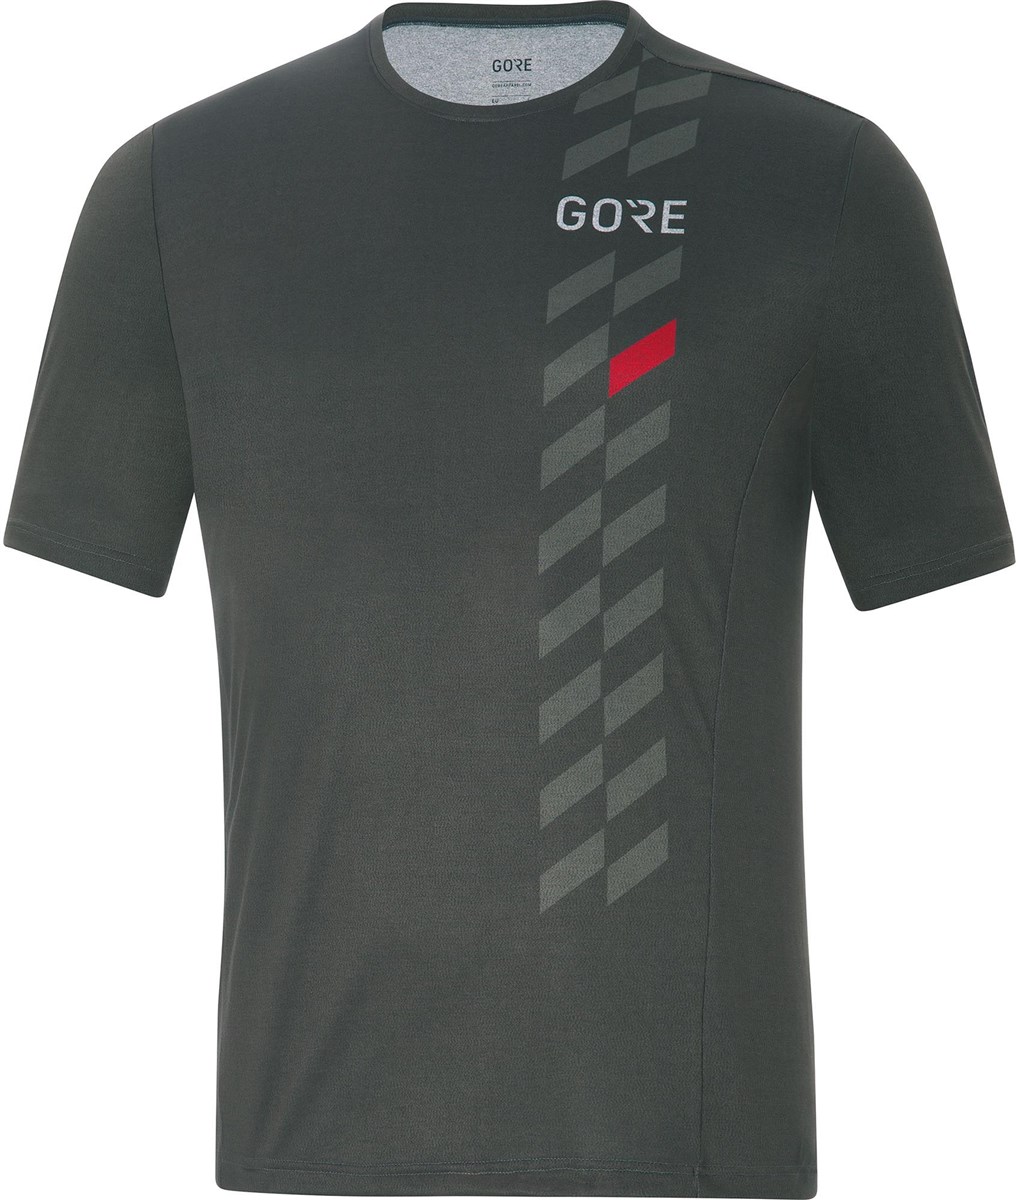 Gore M Brand Short Sleeve Jersey product image